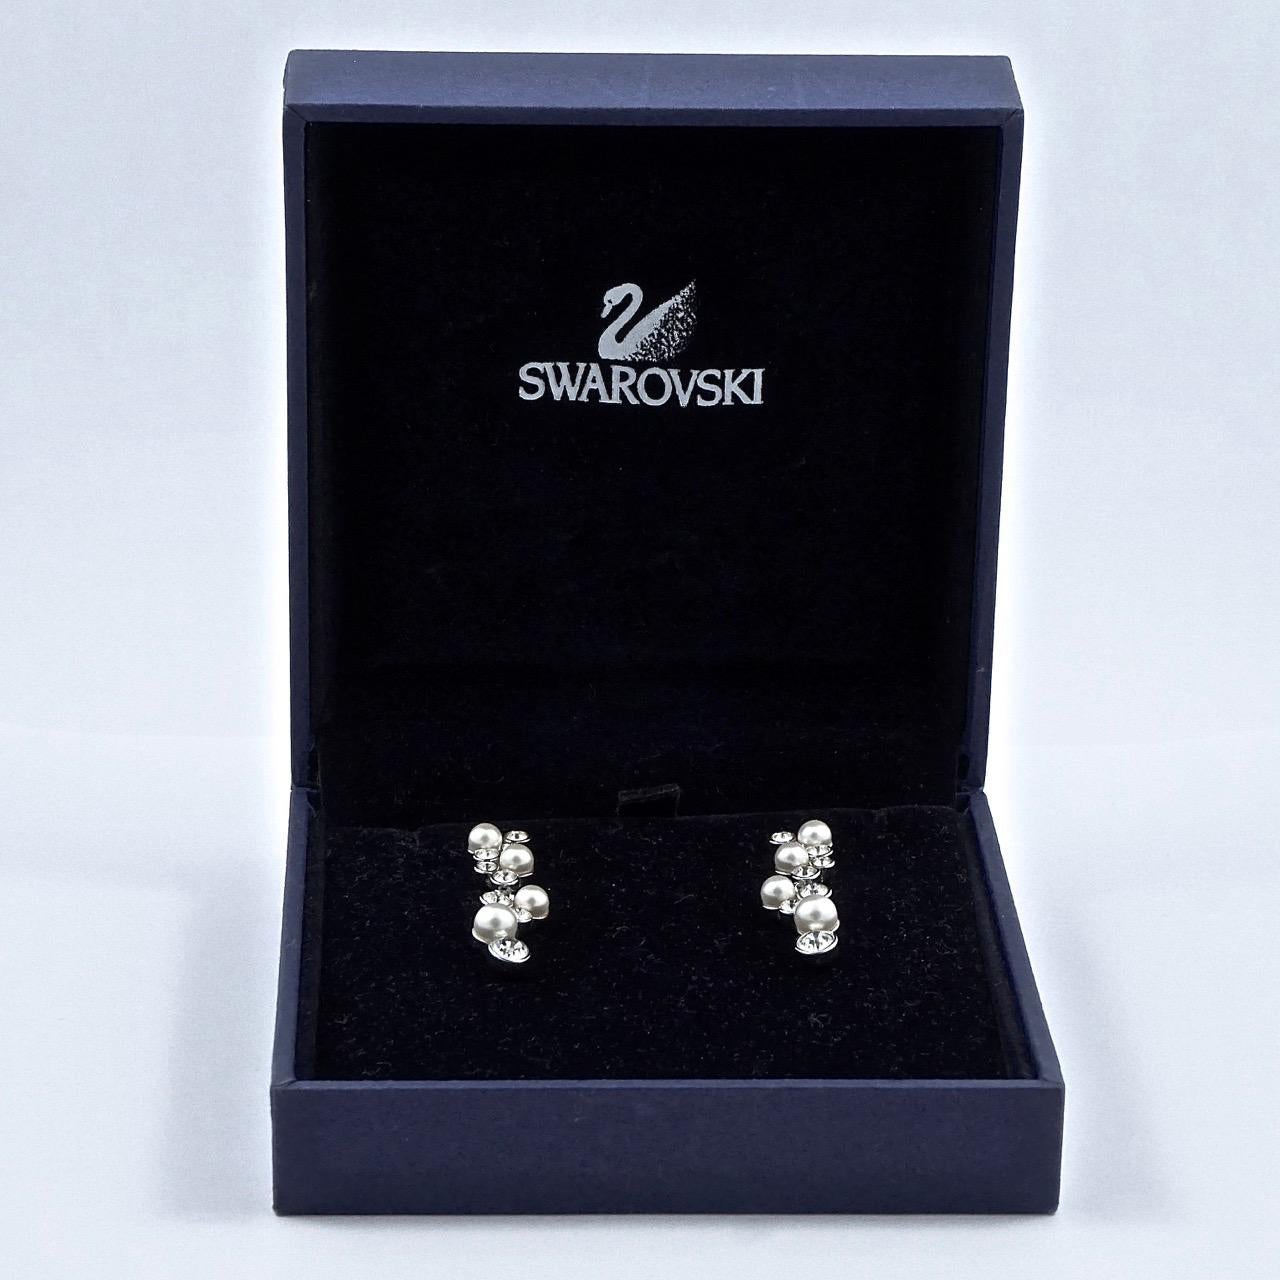 Swarovski Silver Tone Clear Crystal and White Faux Pearl Swan Logo Drop Earrings In Good Condition For Sale In London, GB